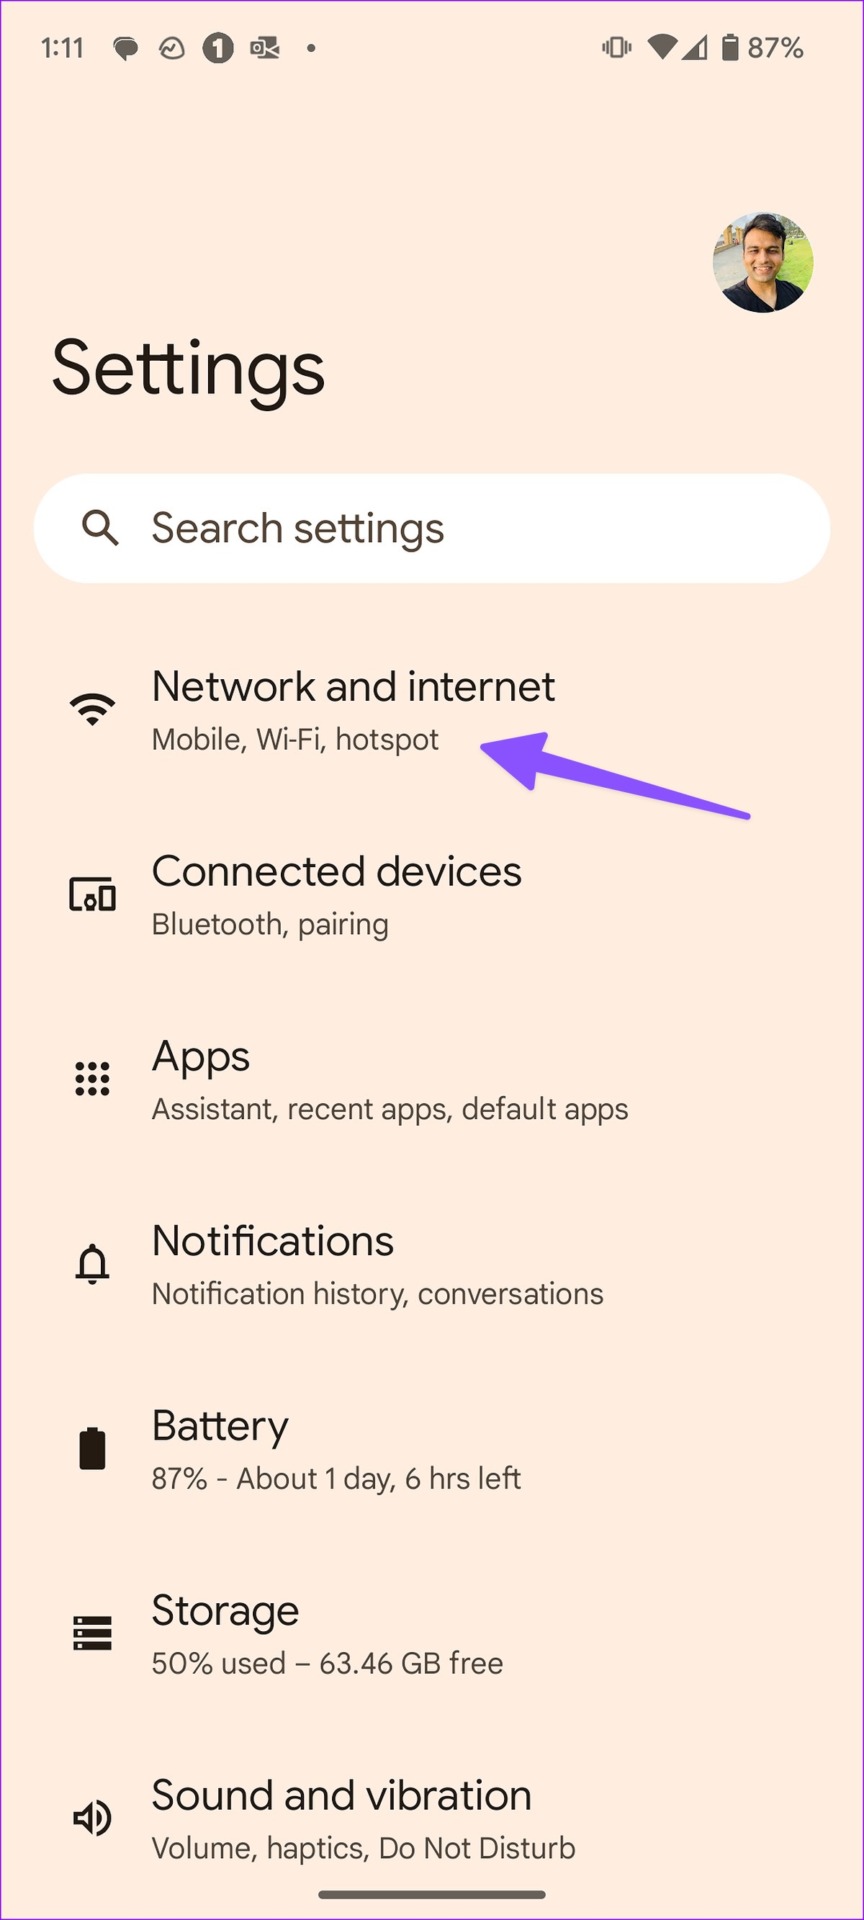 network and internet on Android